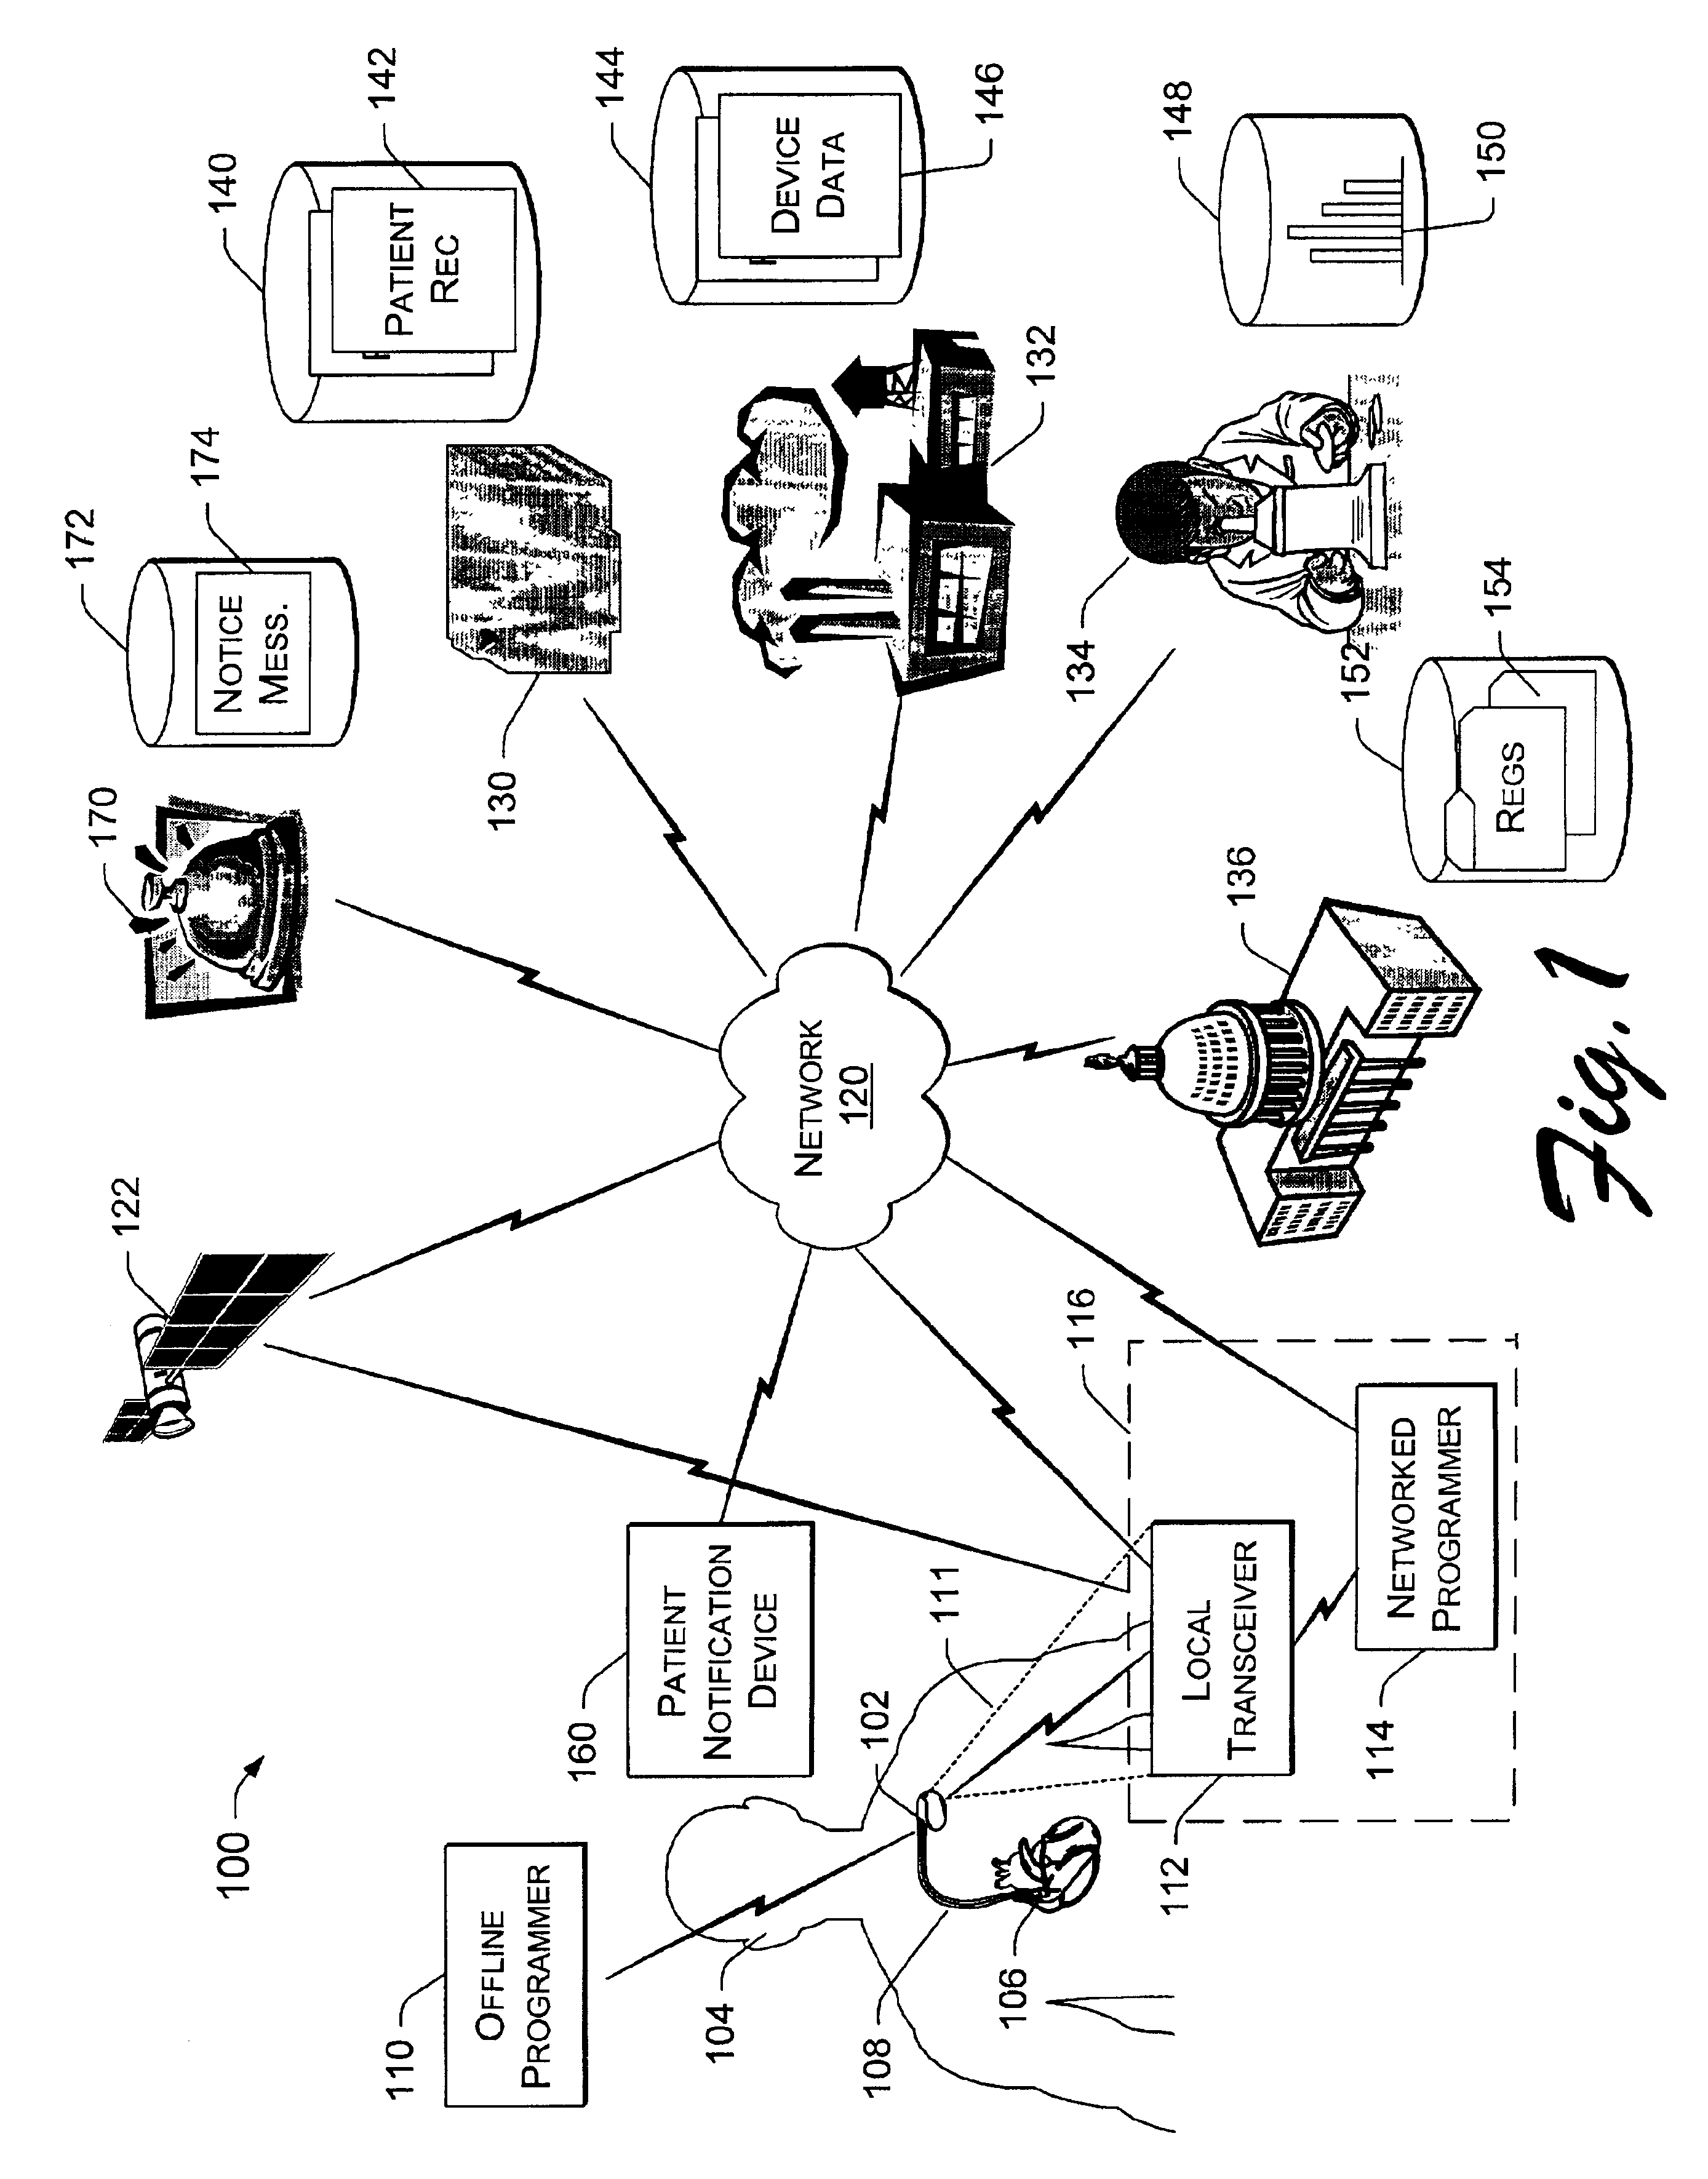 Presentation architecture for network supporting implantable cardiac therapy device